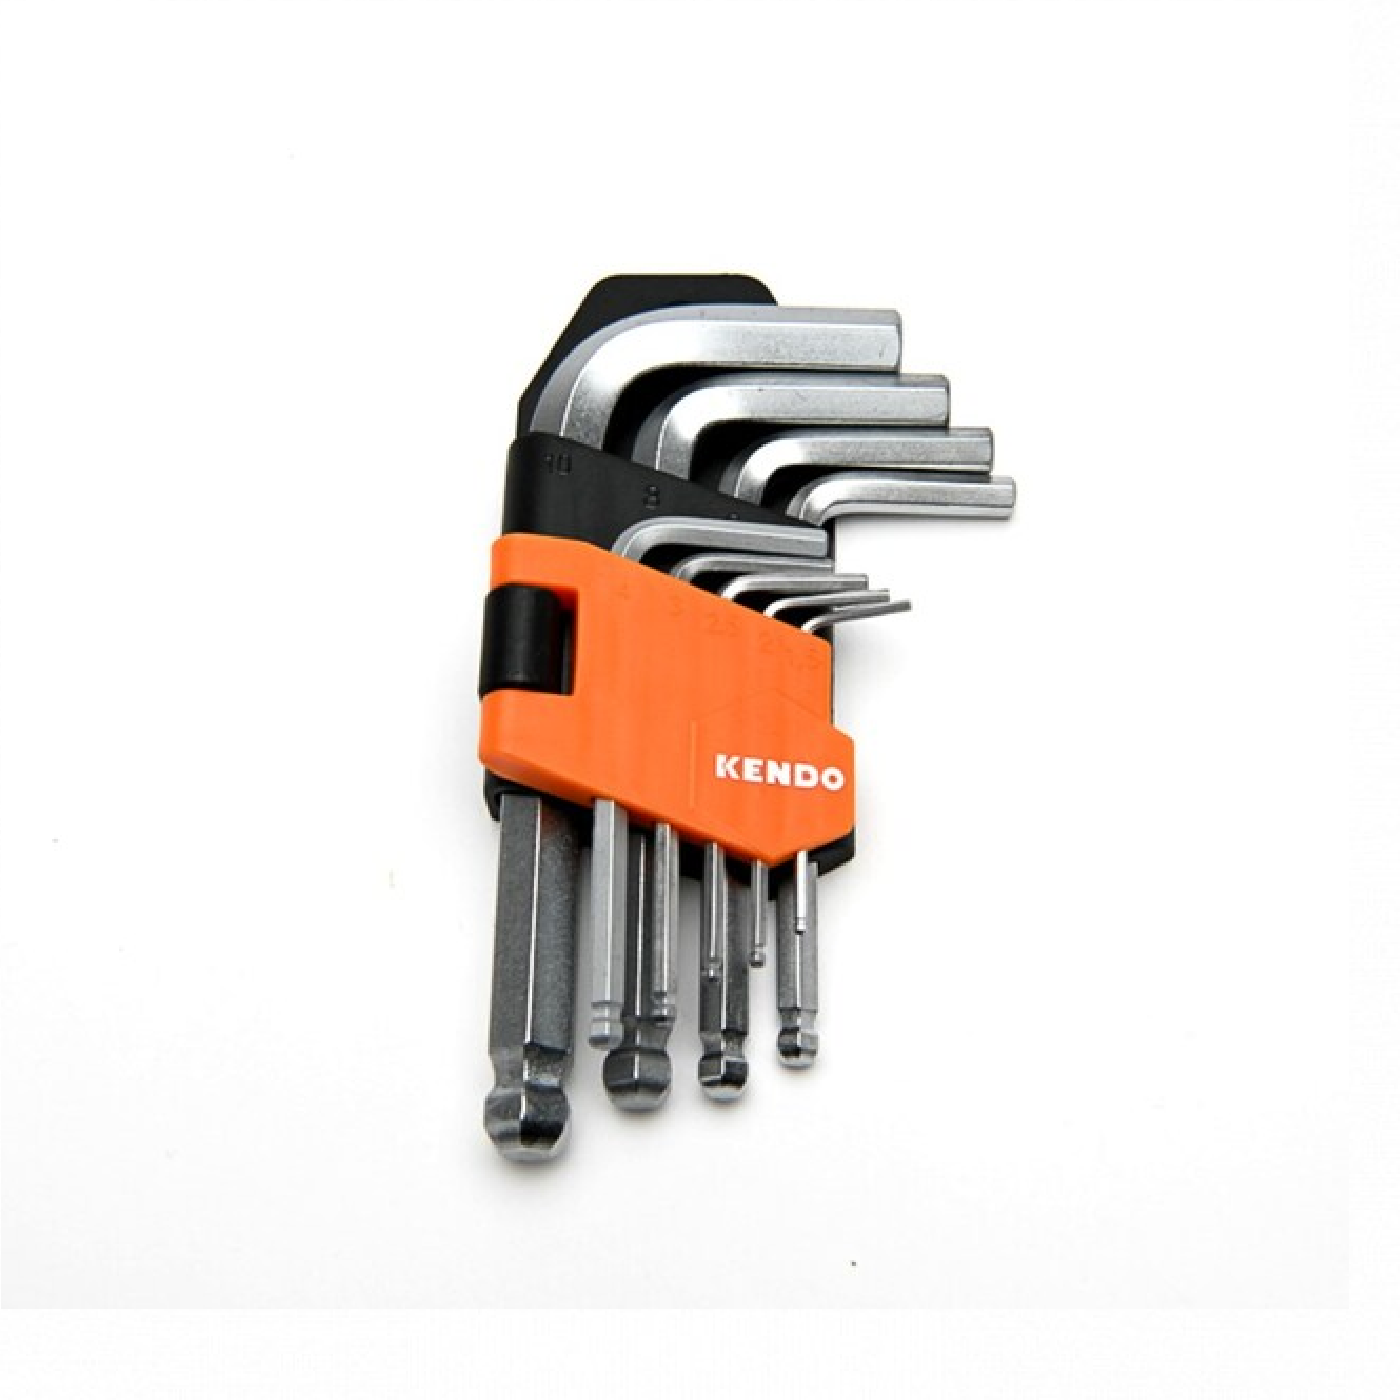 Kendo 20735, 9PC HEX Key With Ball End Set